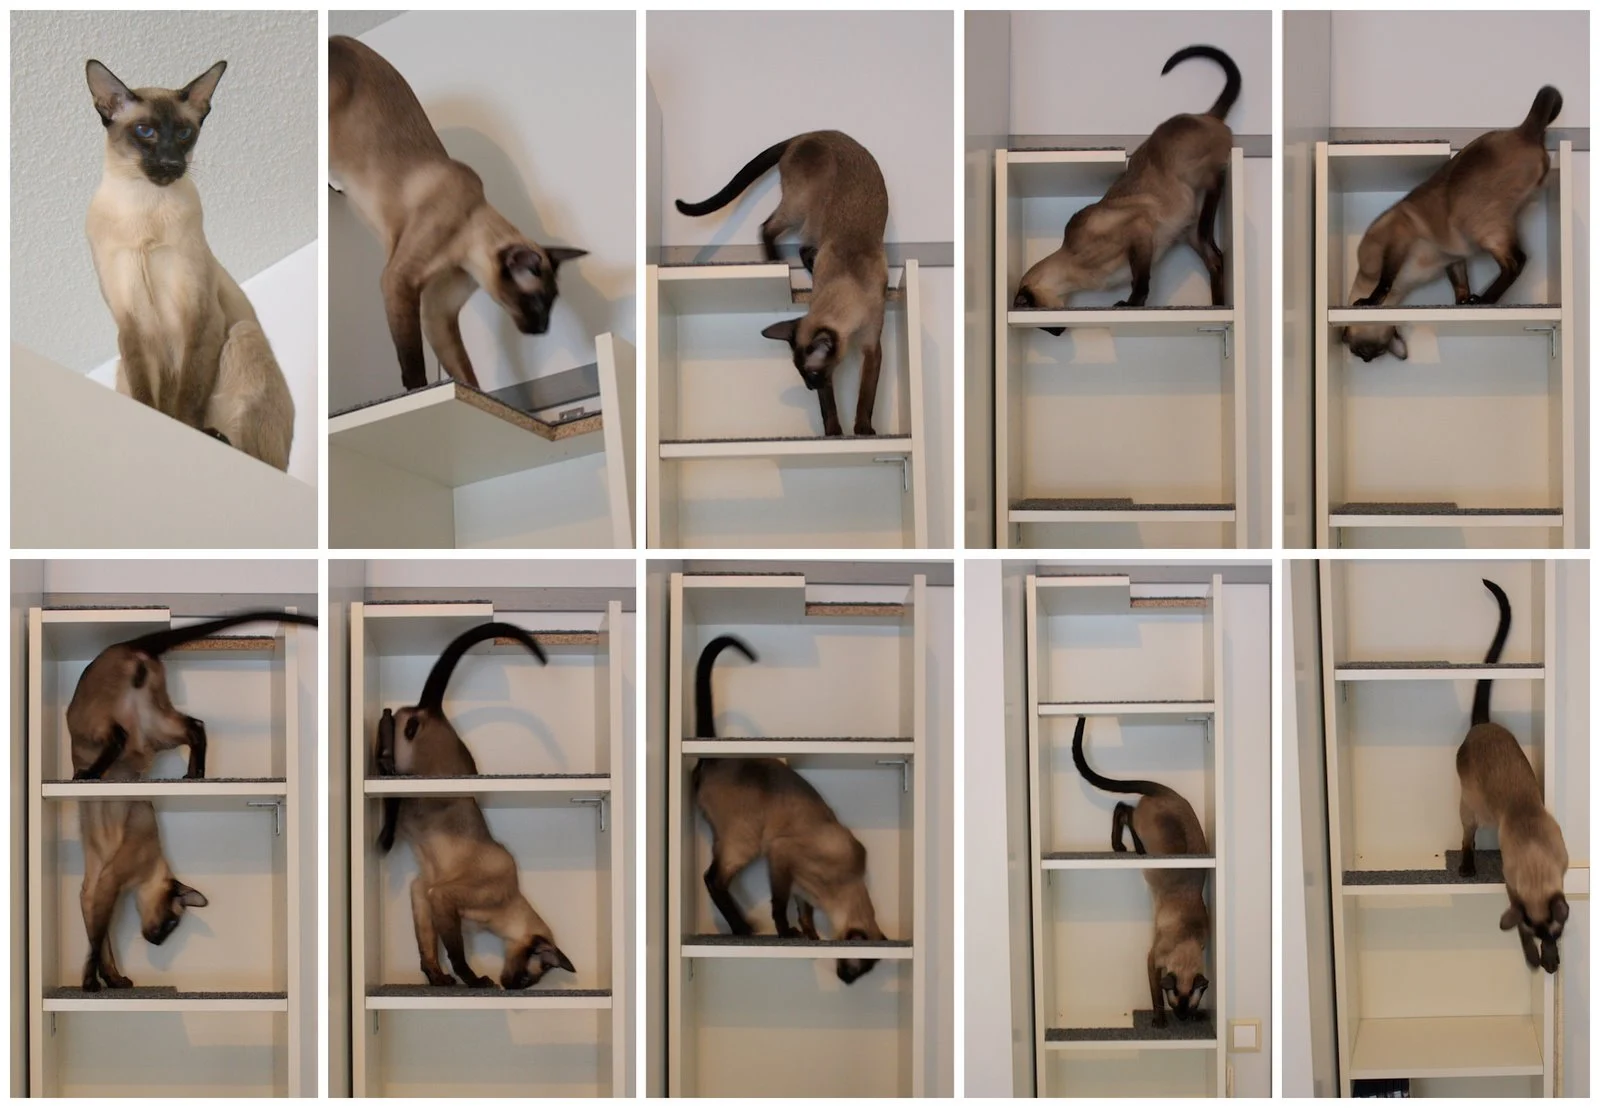 Why Does Your Cat Jump On Your Bookshelf & Climb